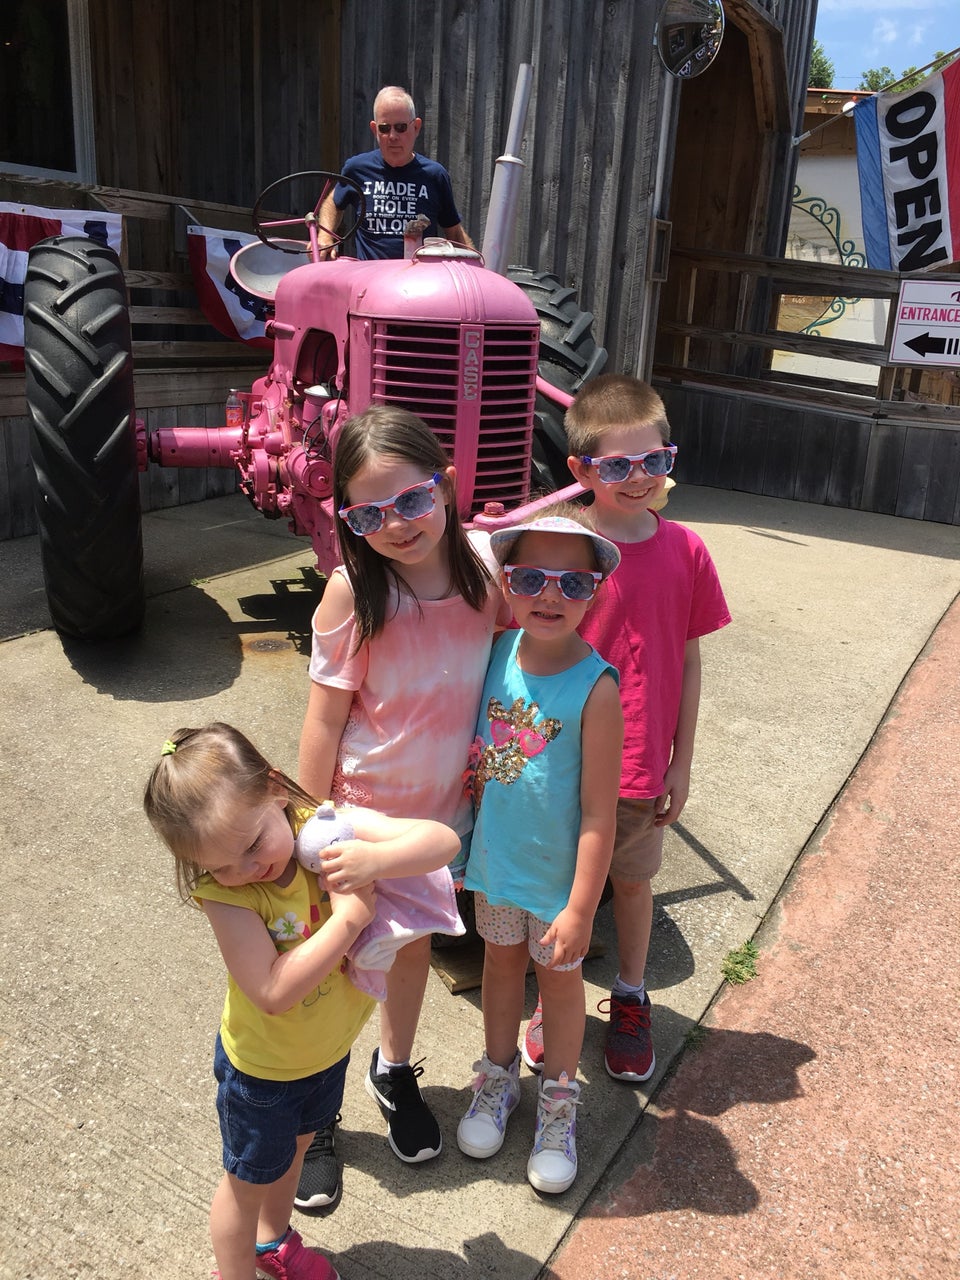 The pink tractor